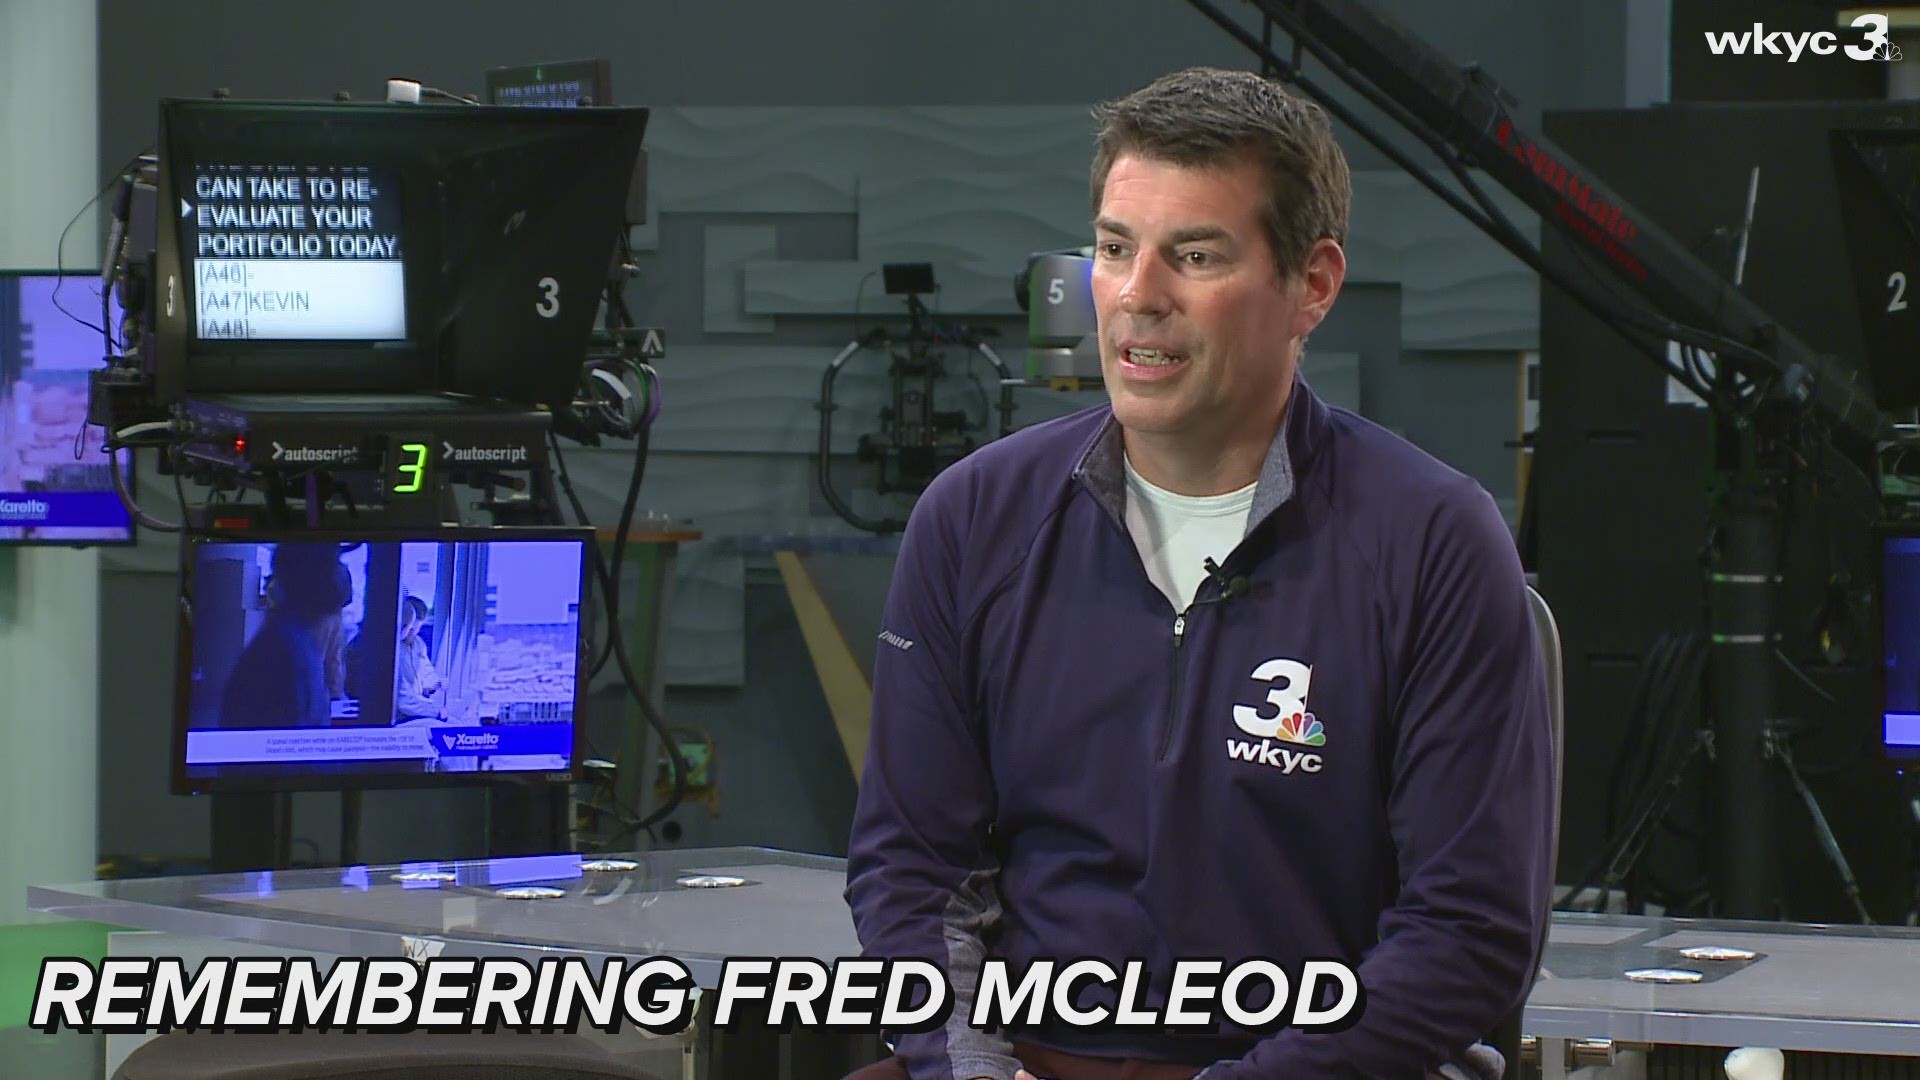 The Cleveland Cavaliers announced on Tuesday that TV play-by-play announced Fred McLeod has passed away.